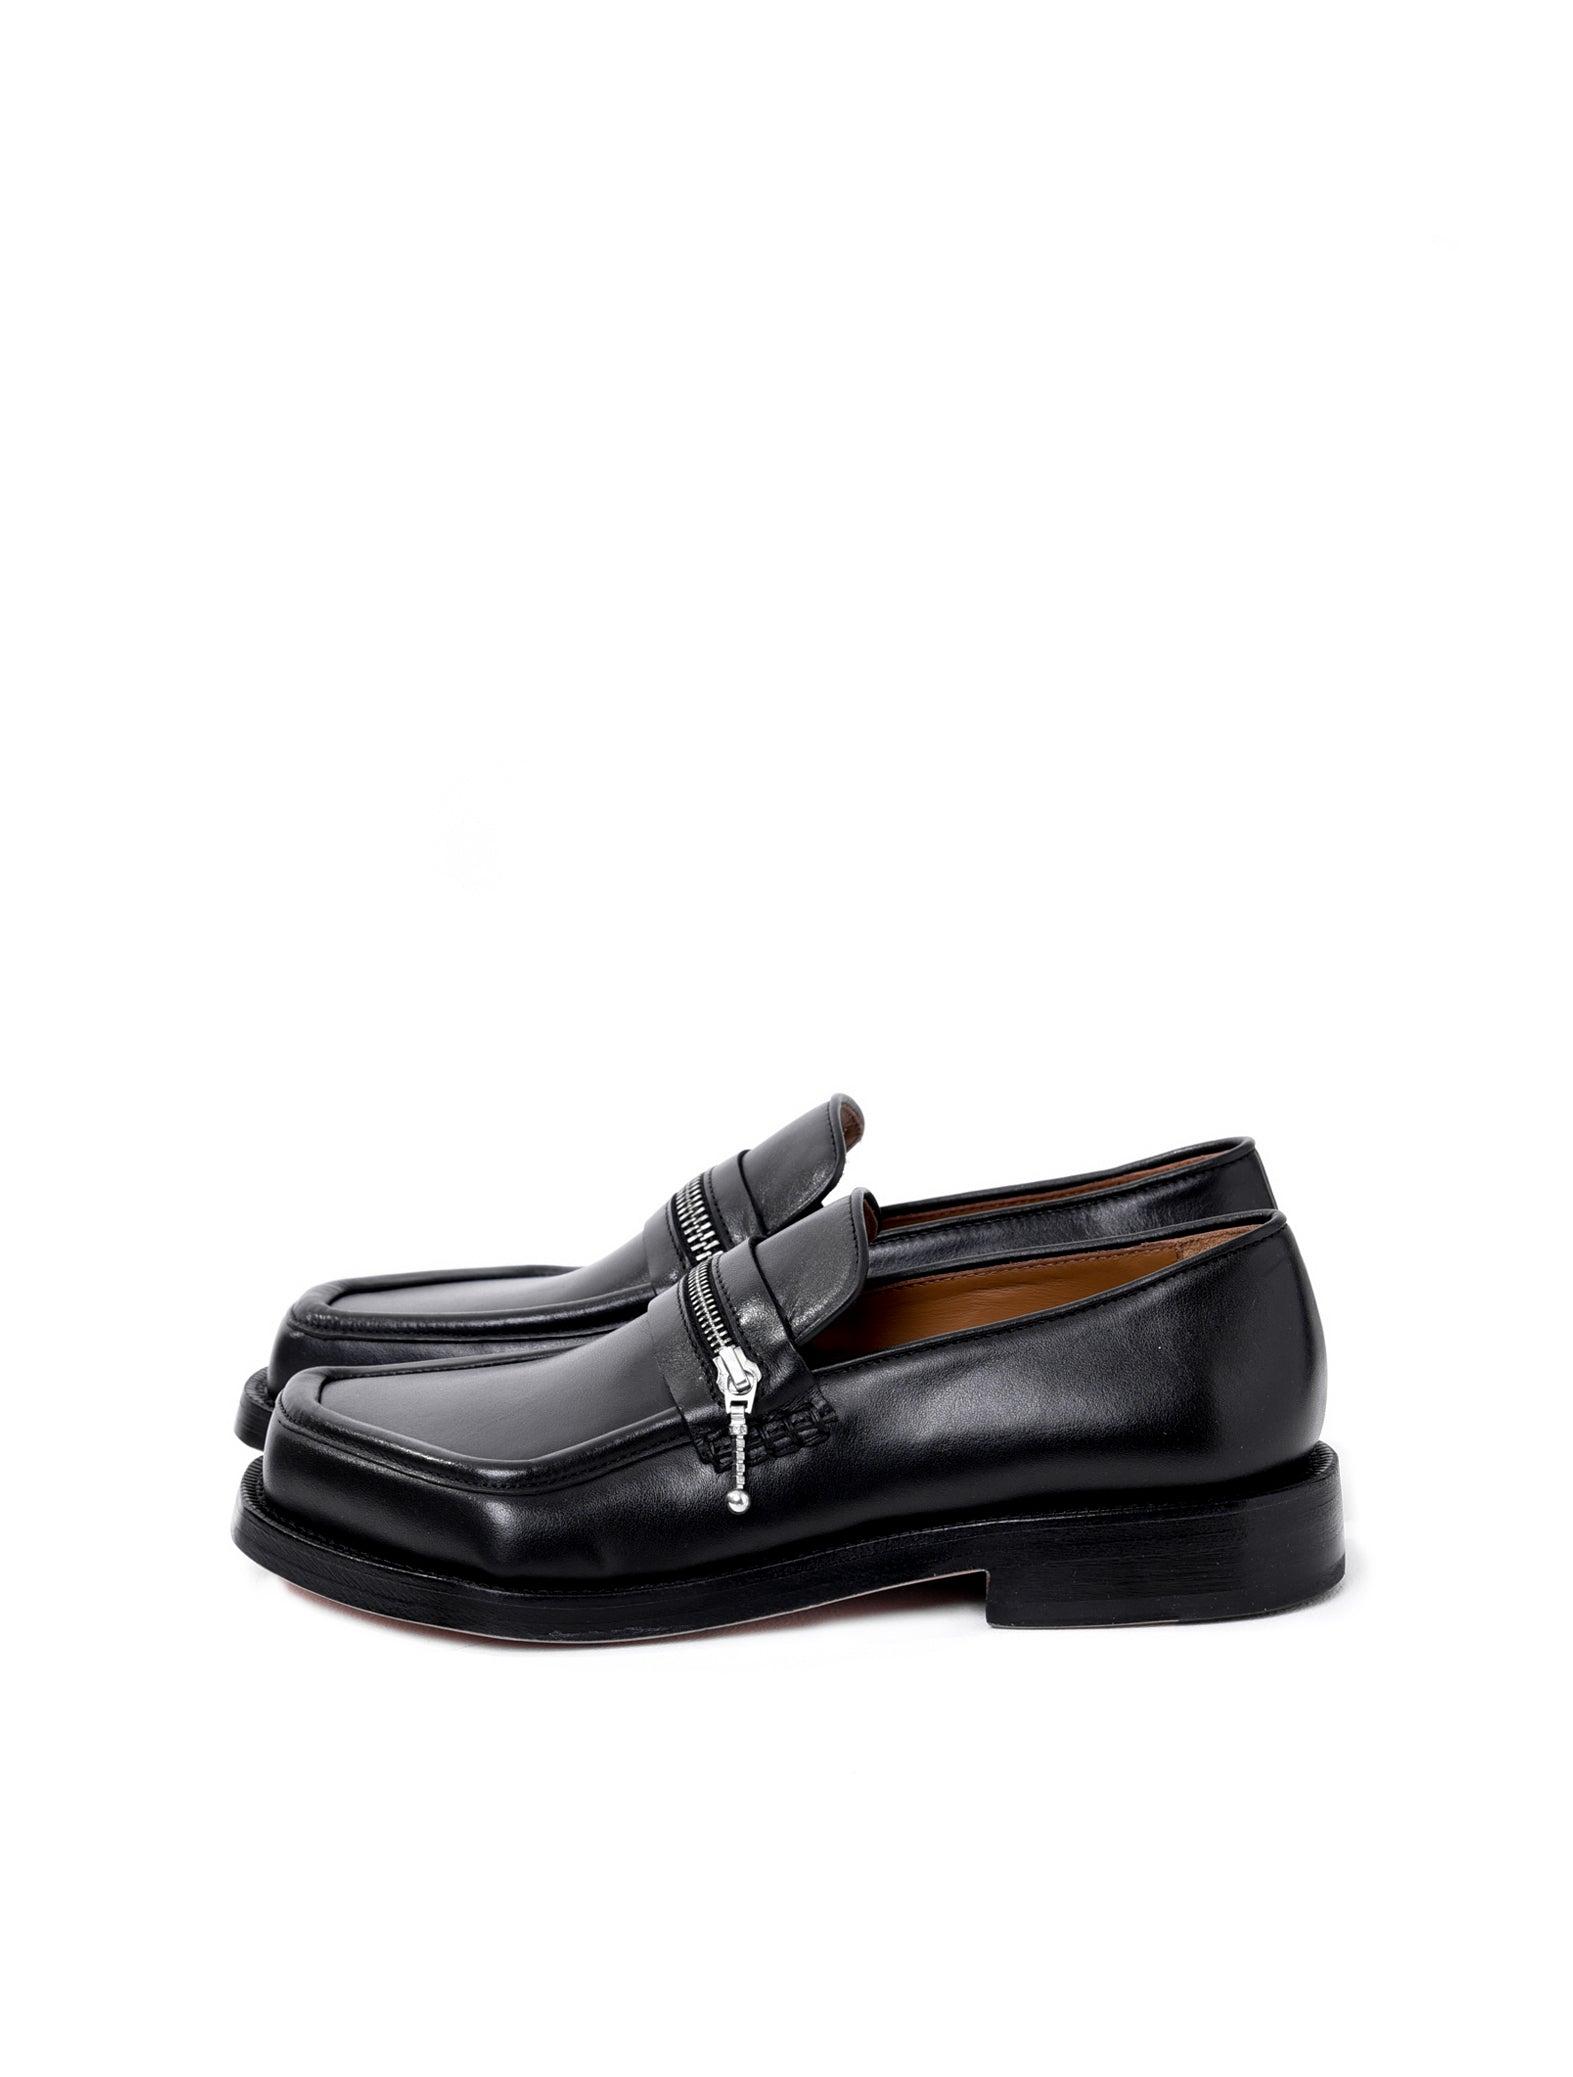 Magliano Leather Black Classic Monster Loafer - Lyst